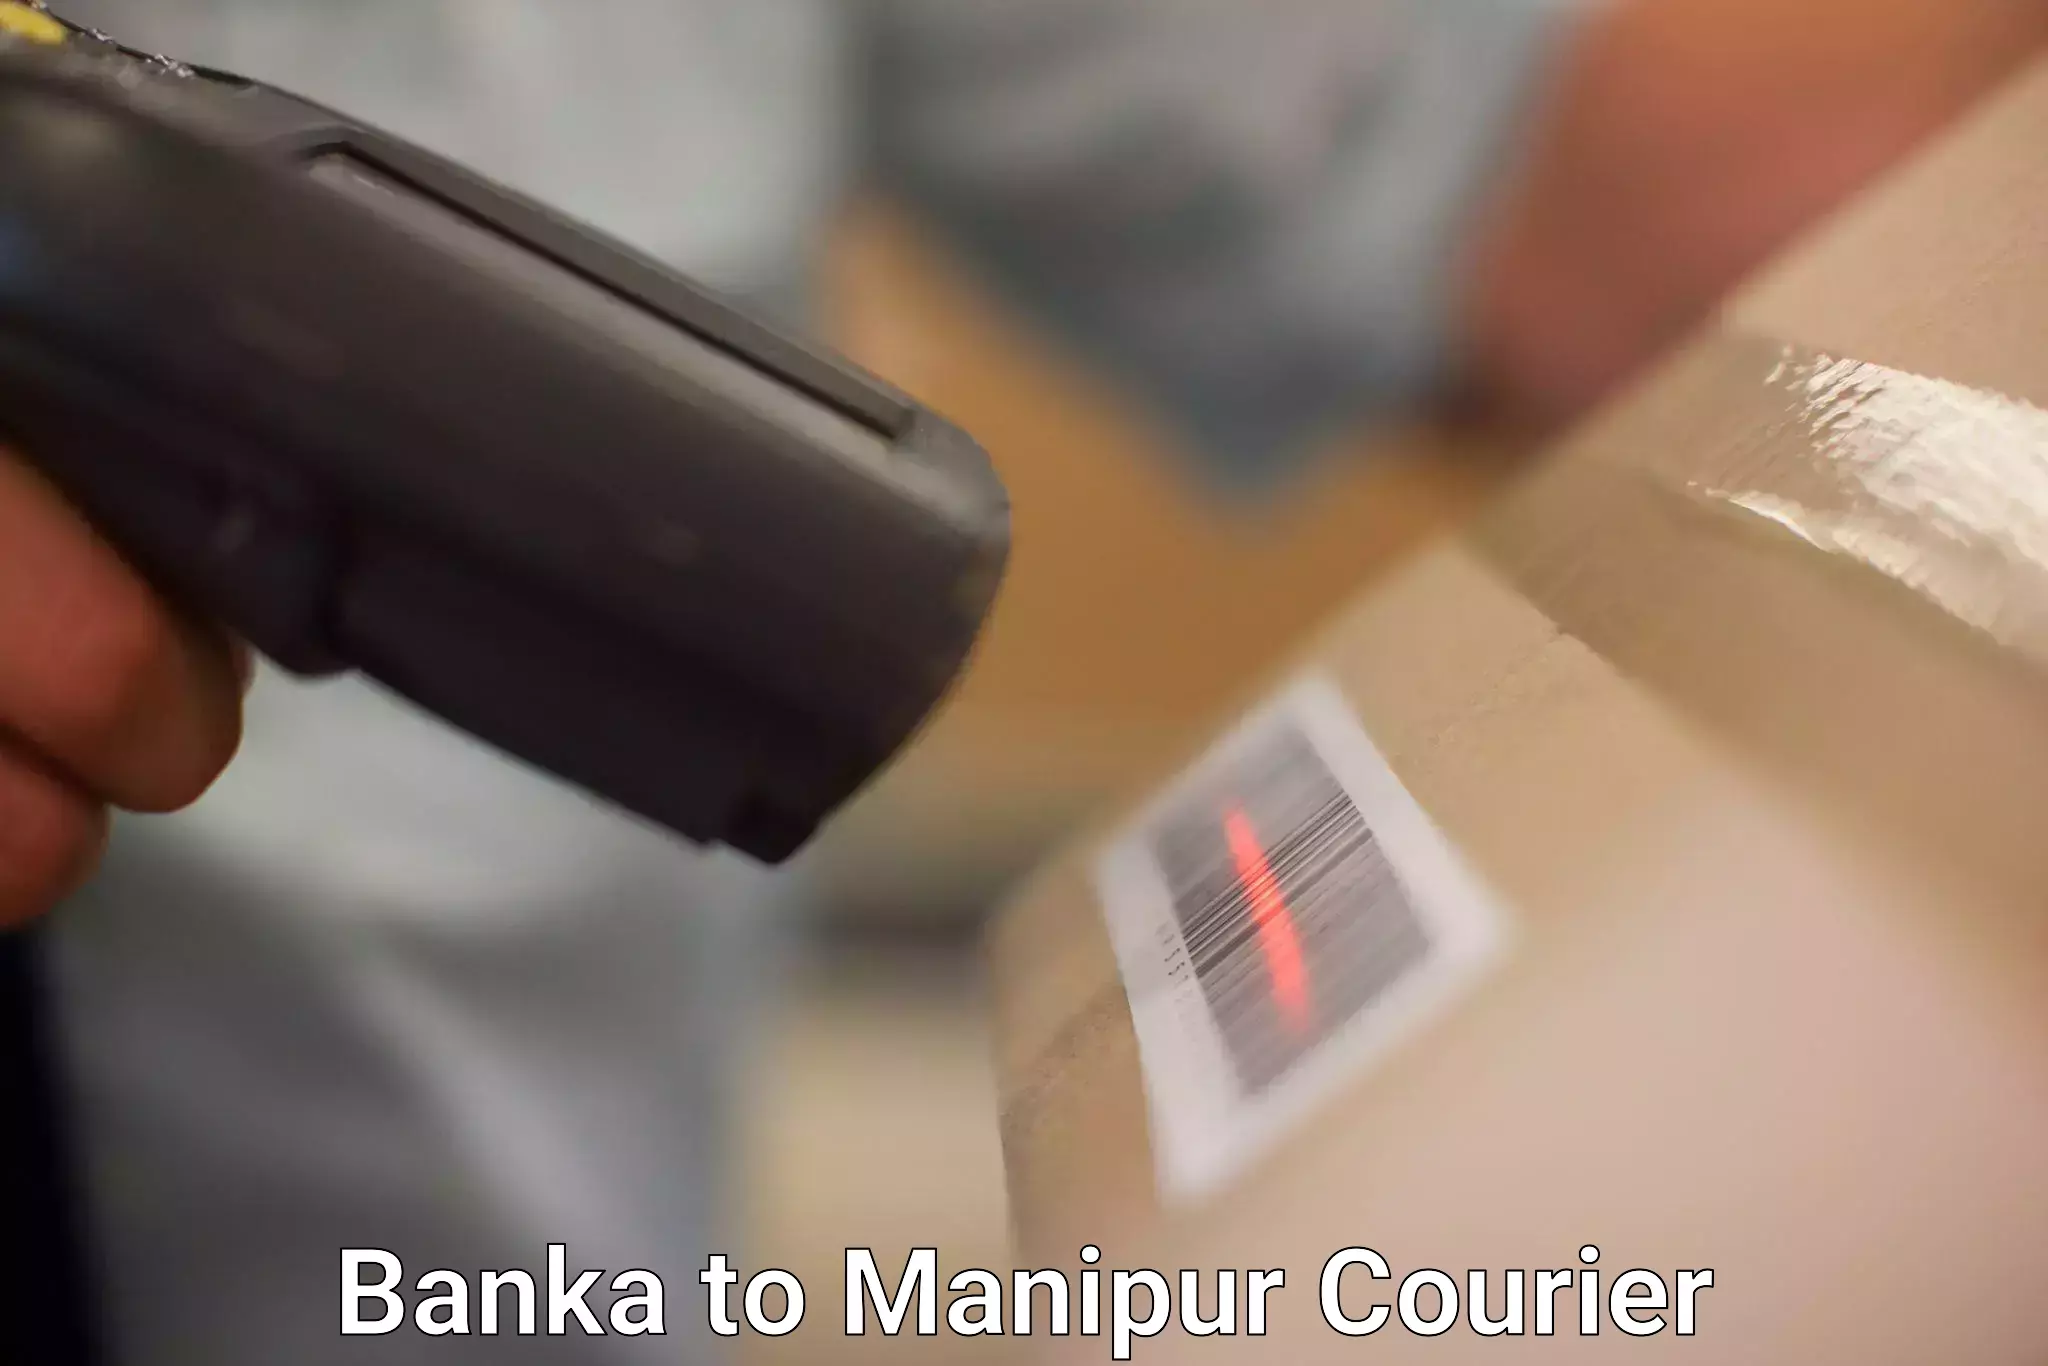 User-friendly delivery service Banka to Manipur